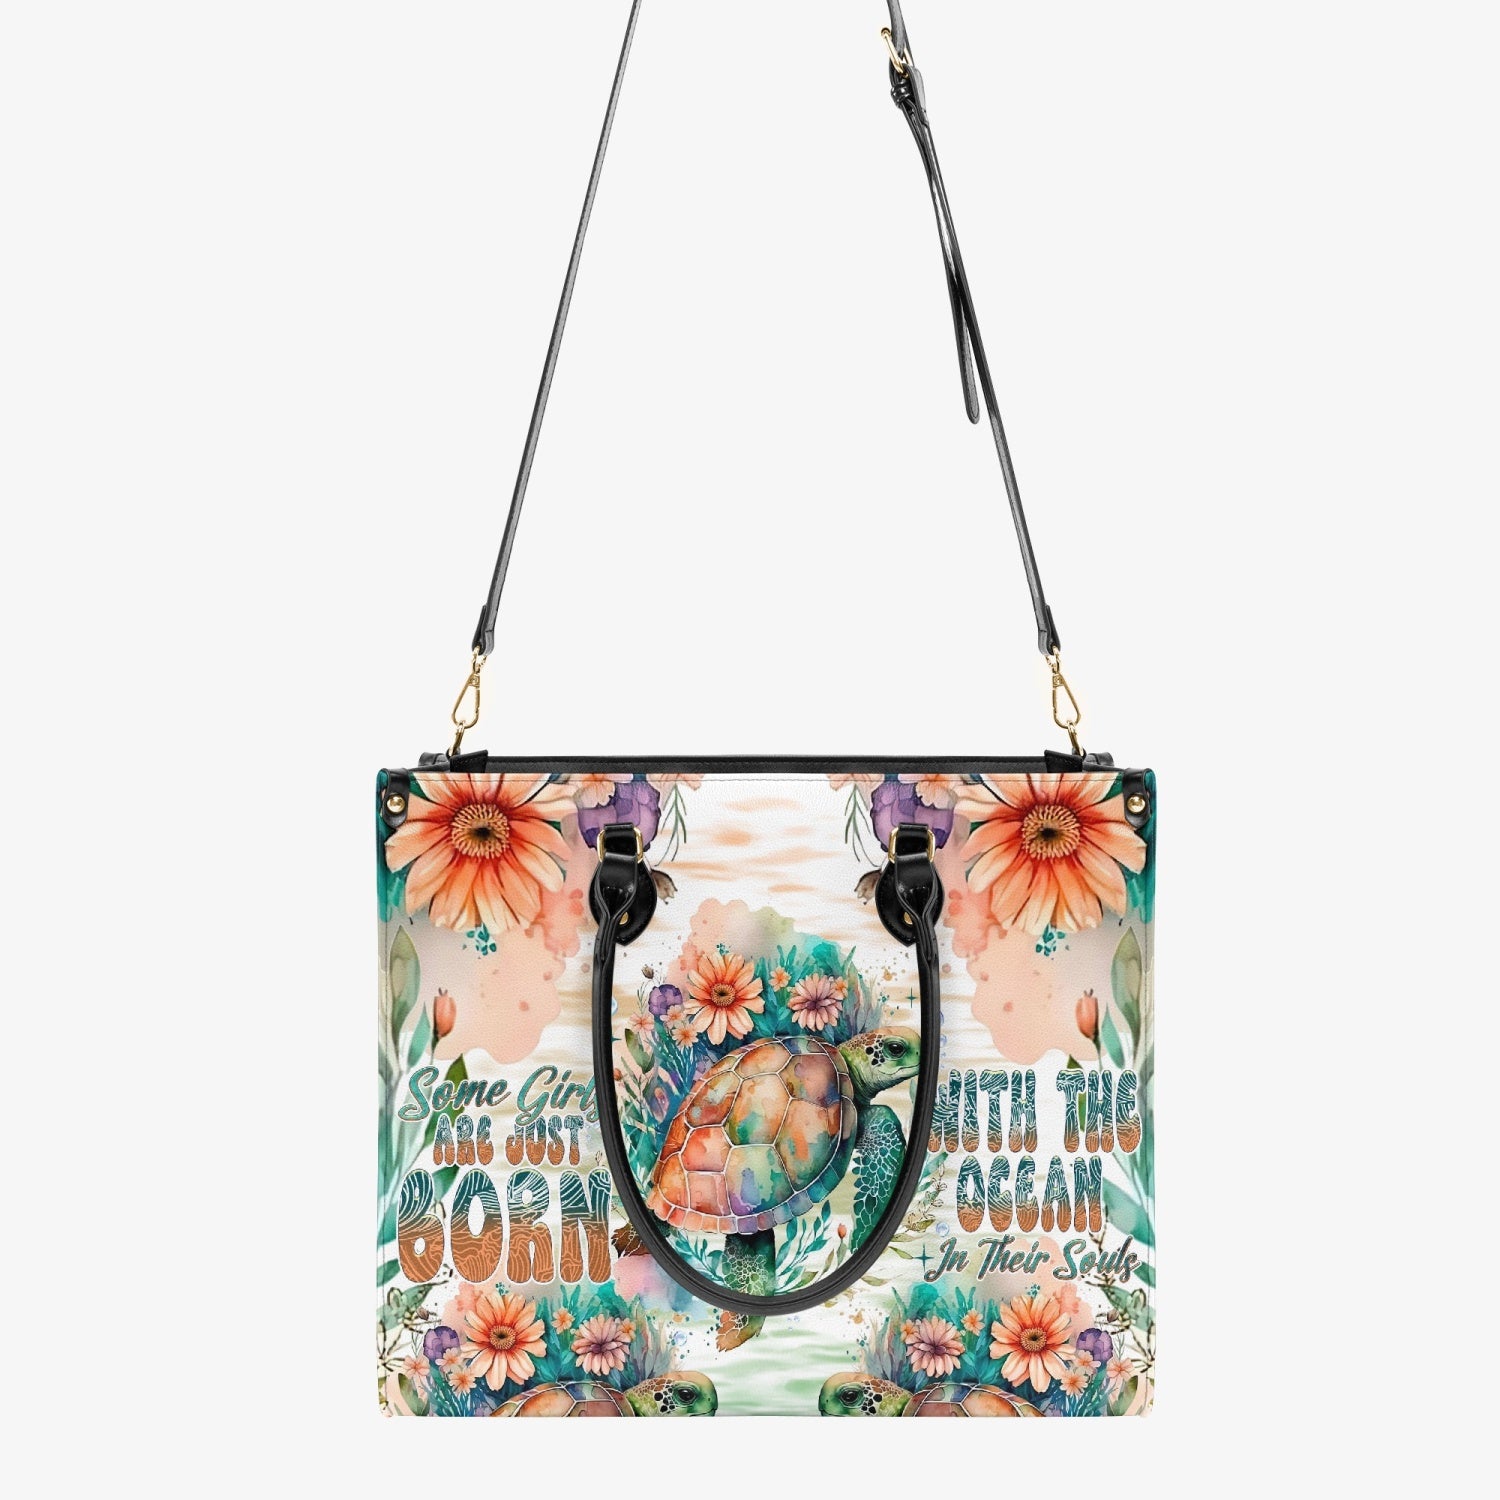 SOME GIRLS ARE JUST BORN TURLTE WATERCOLOR LEATHER HANDBAG - TLNT1104247